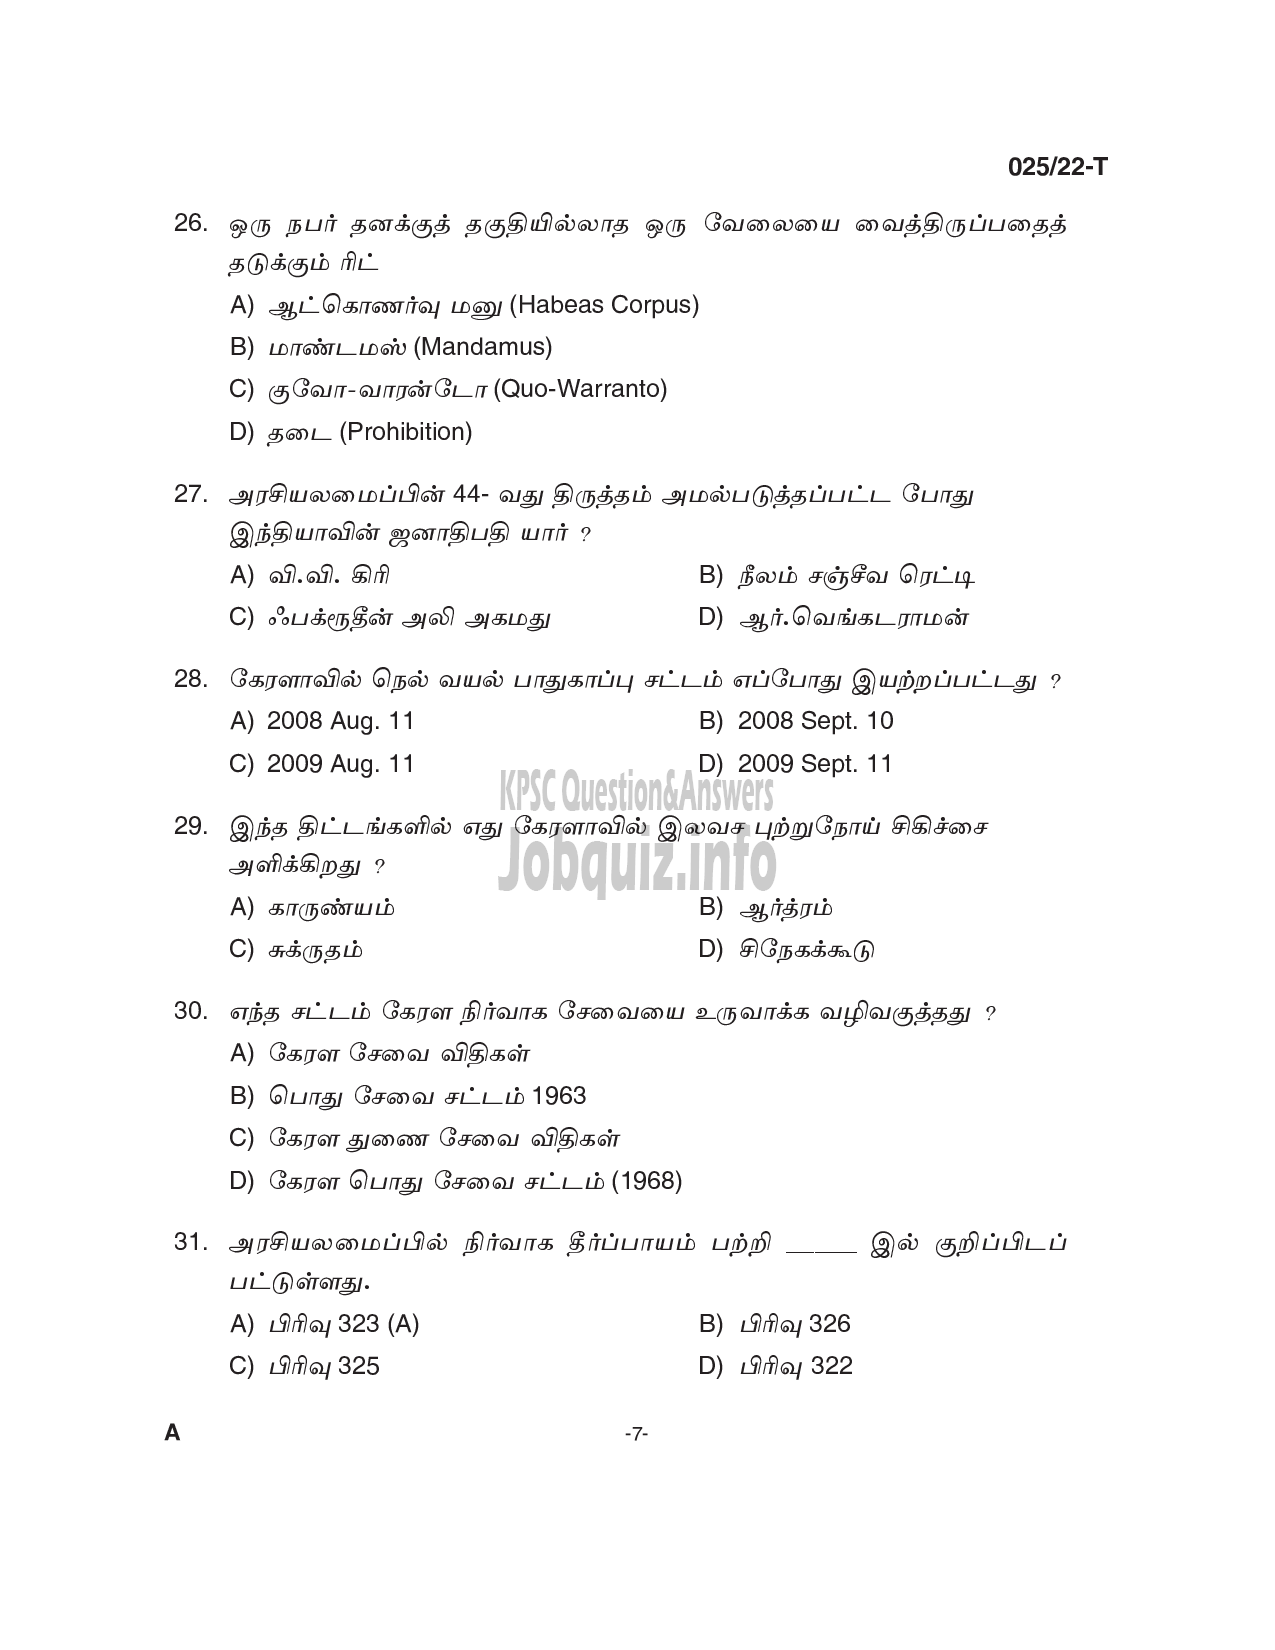 Kerala PSC Question Paper -  Civil Excise Officer/ Women Civil Excise Officer (Plus 2 Level Main Examination) in Excise.  -7